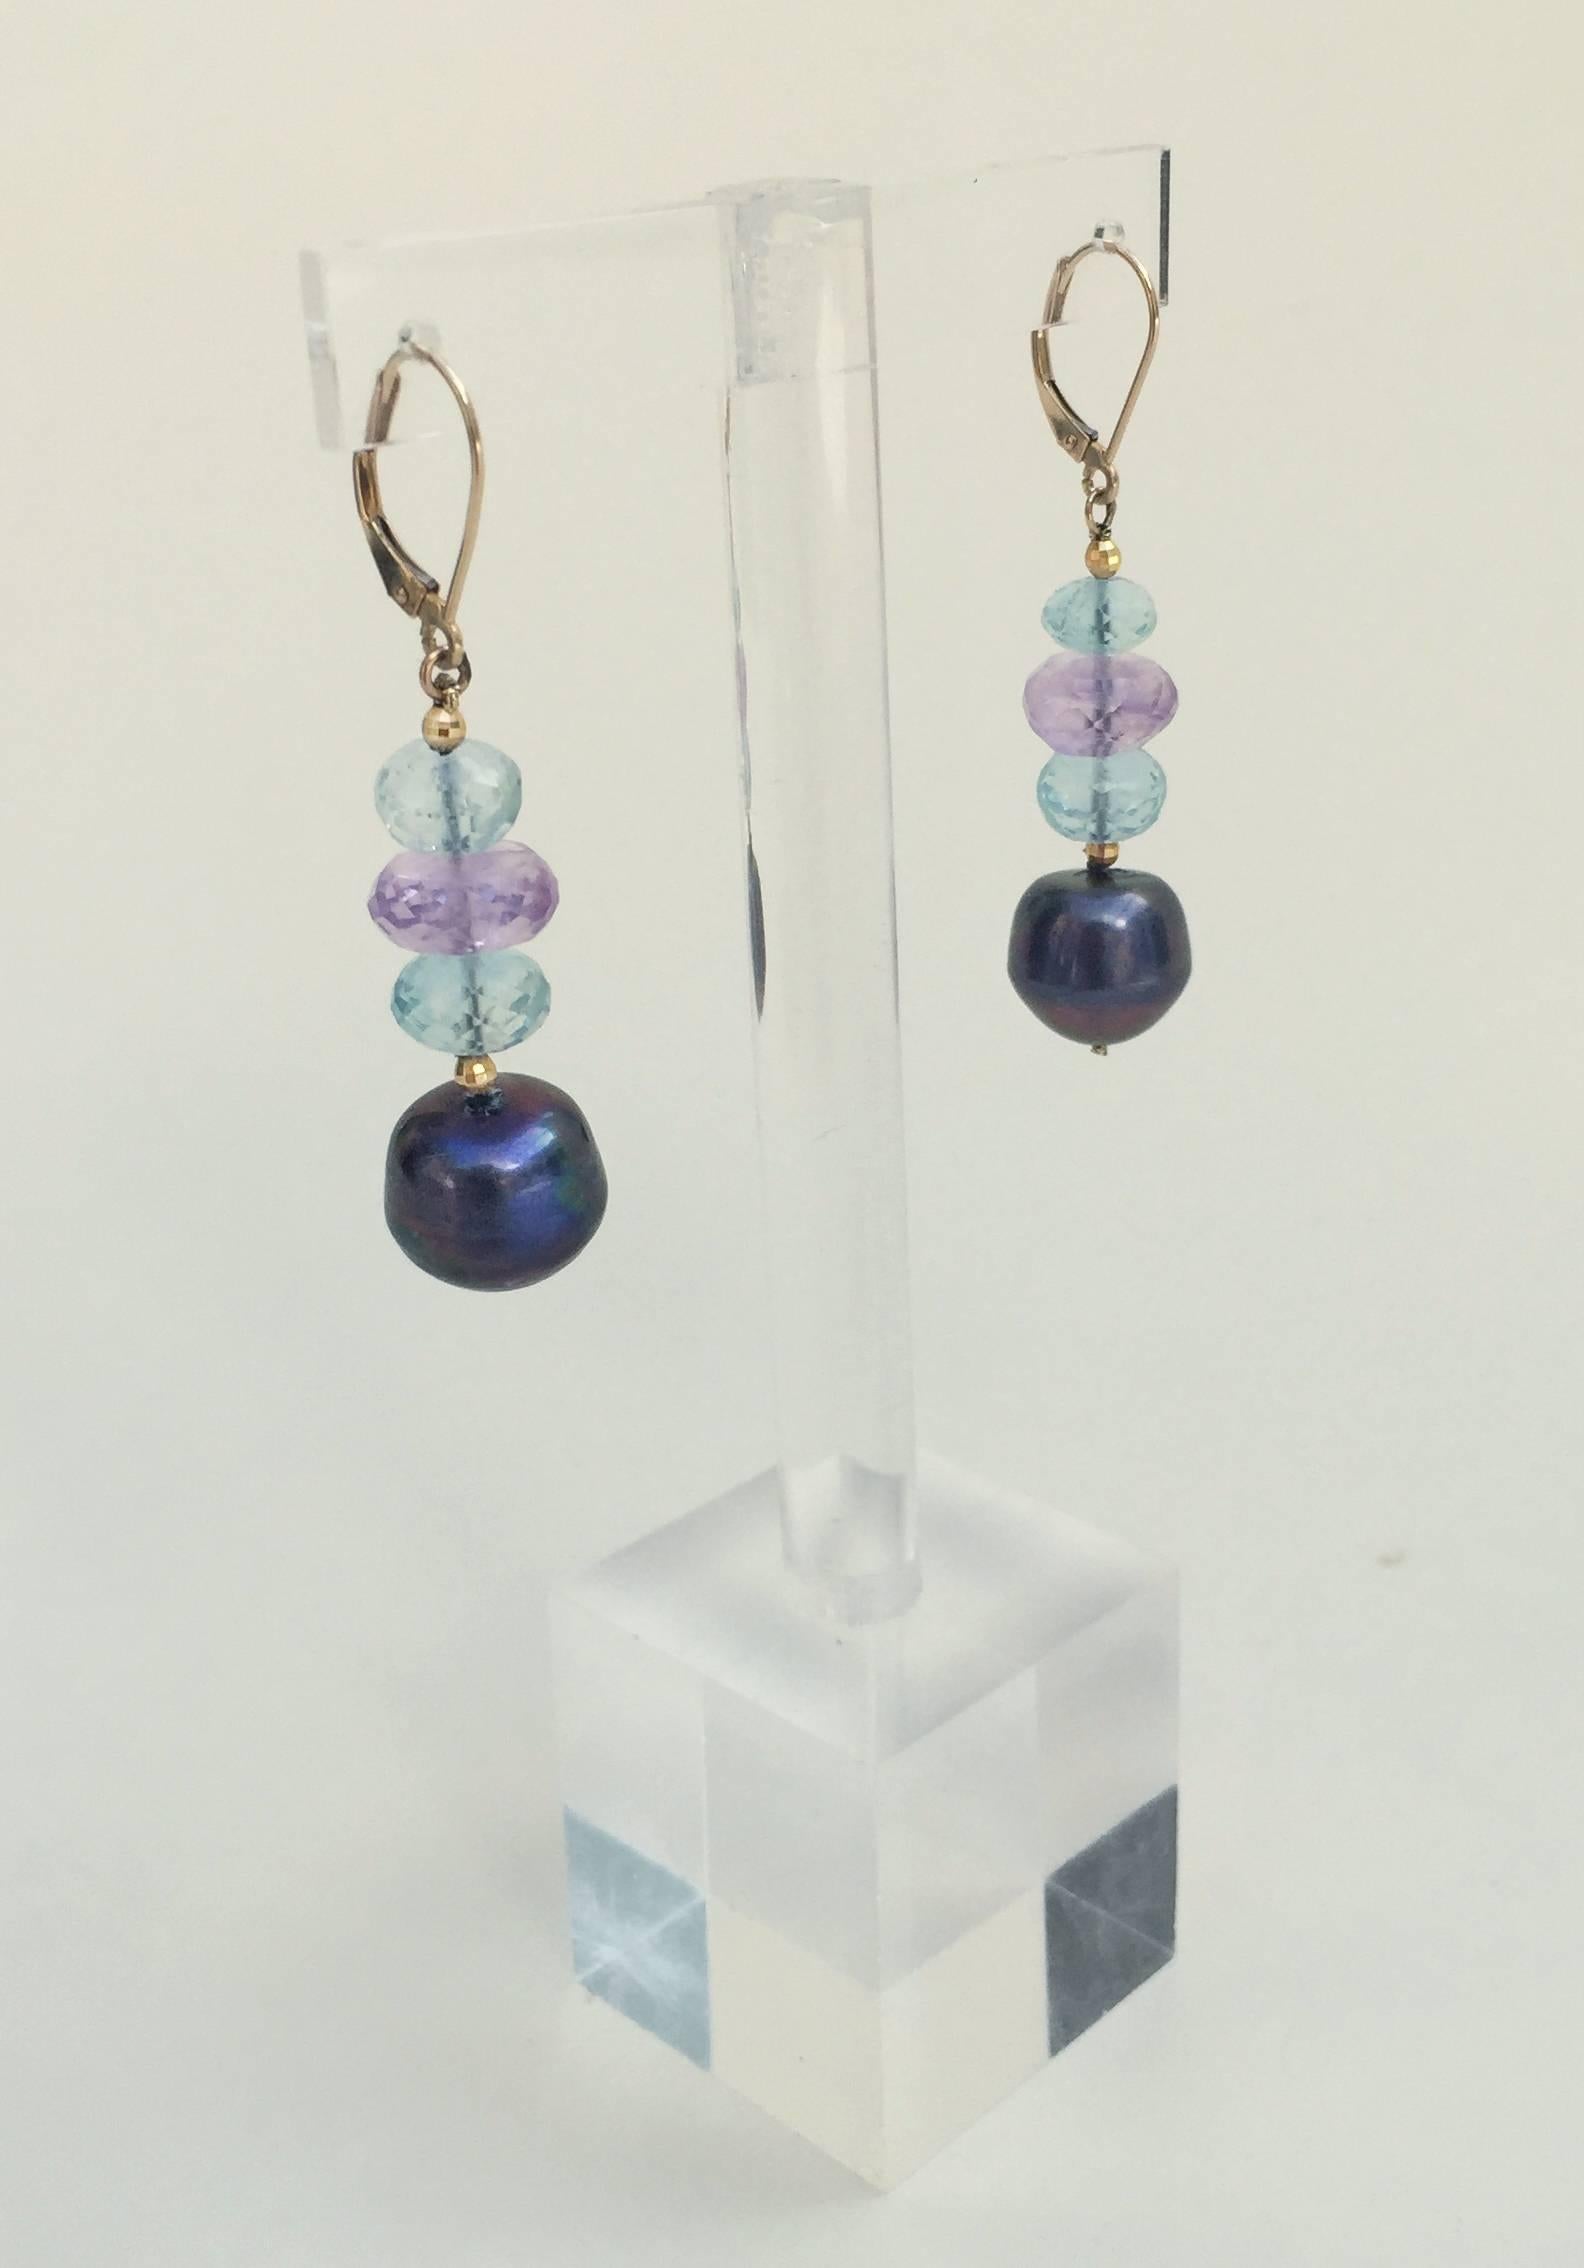 These 1.75 inch long earrings are composed of blue topaz, amethyst, and baroque black pearl beads. The earrings are secured with a 14k yellow gold lever back and hang perfectly to frame the face. 

*These earrings are a great match with any original